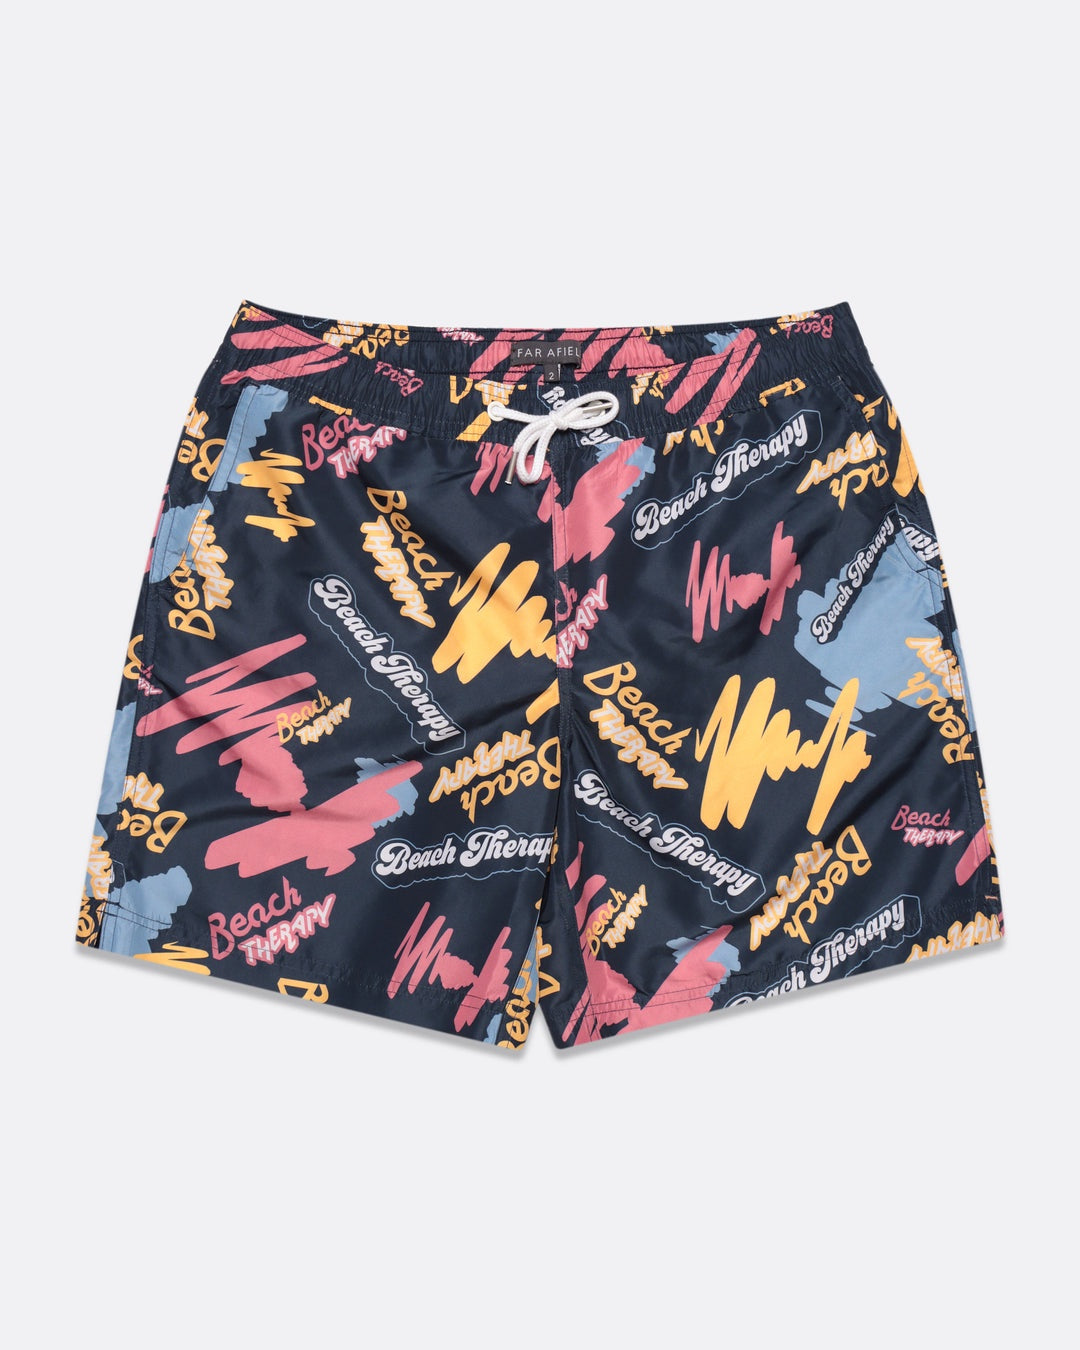 Far Afield Beach Therapy Printed Swimshorts